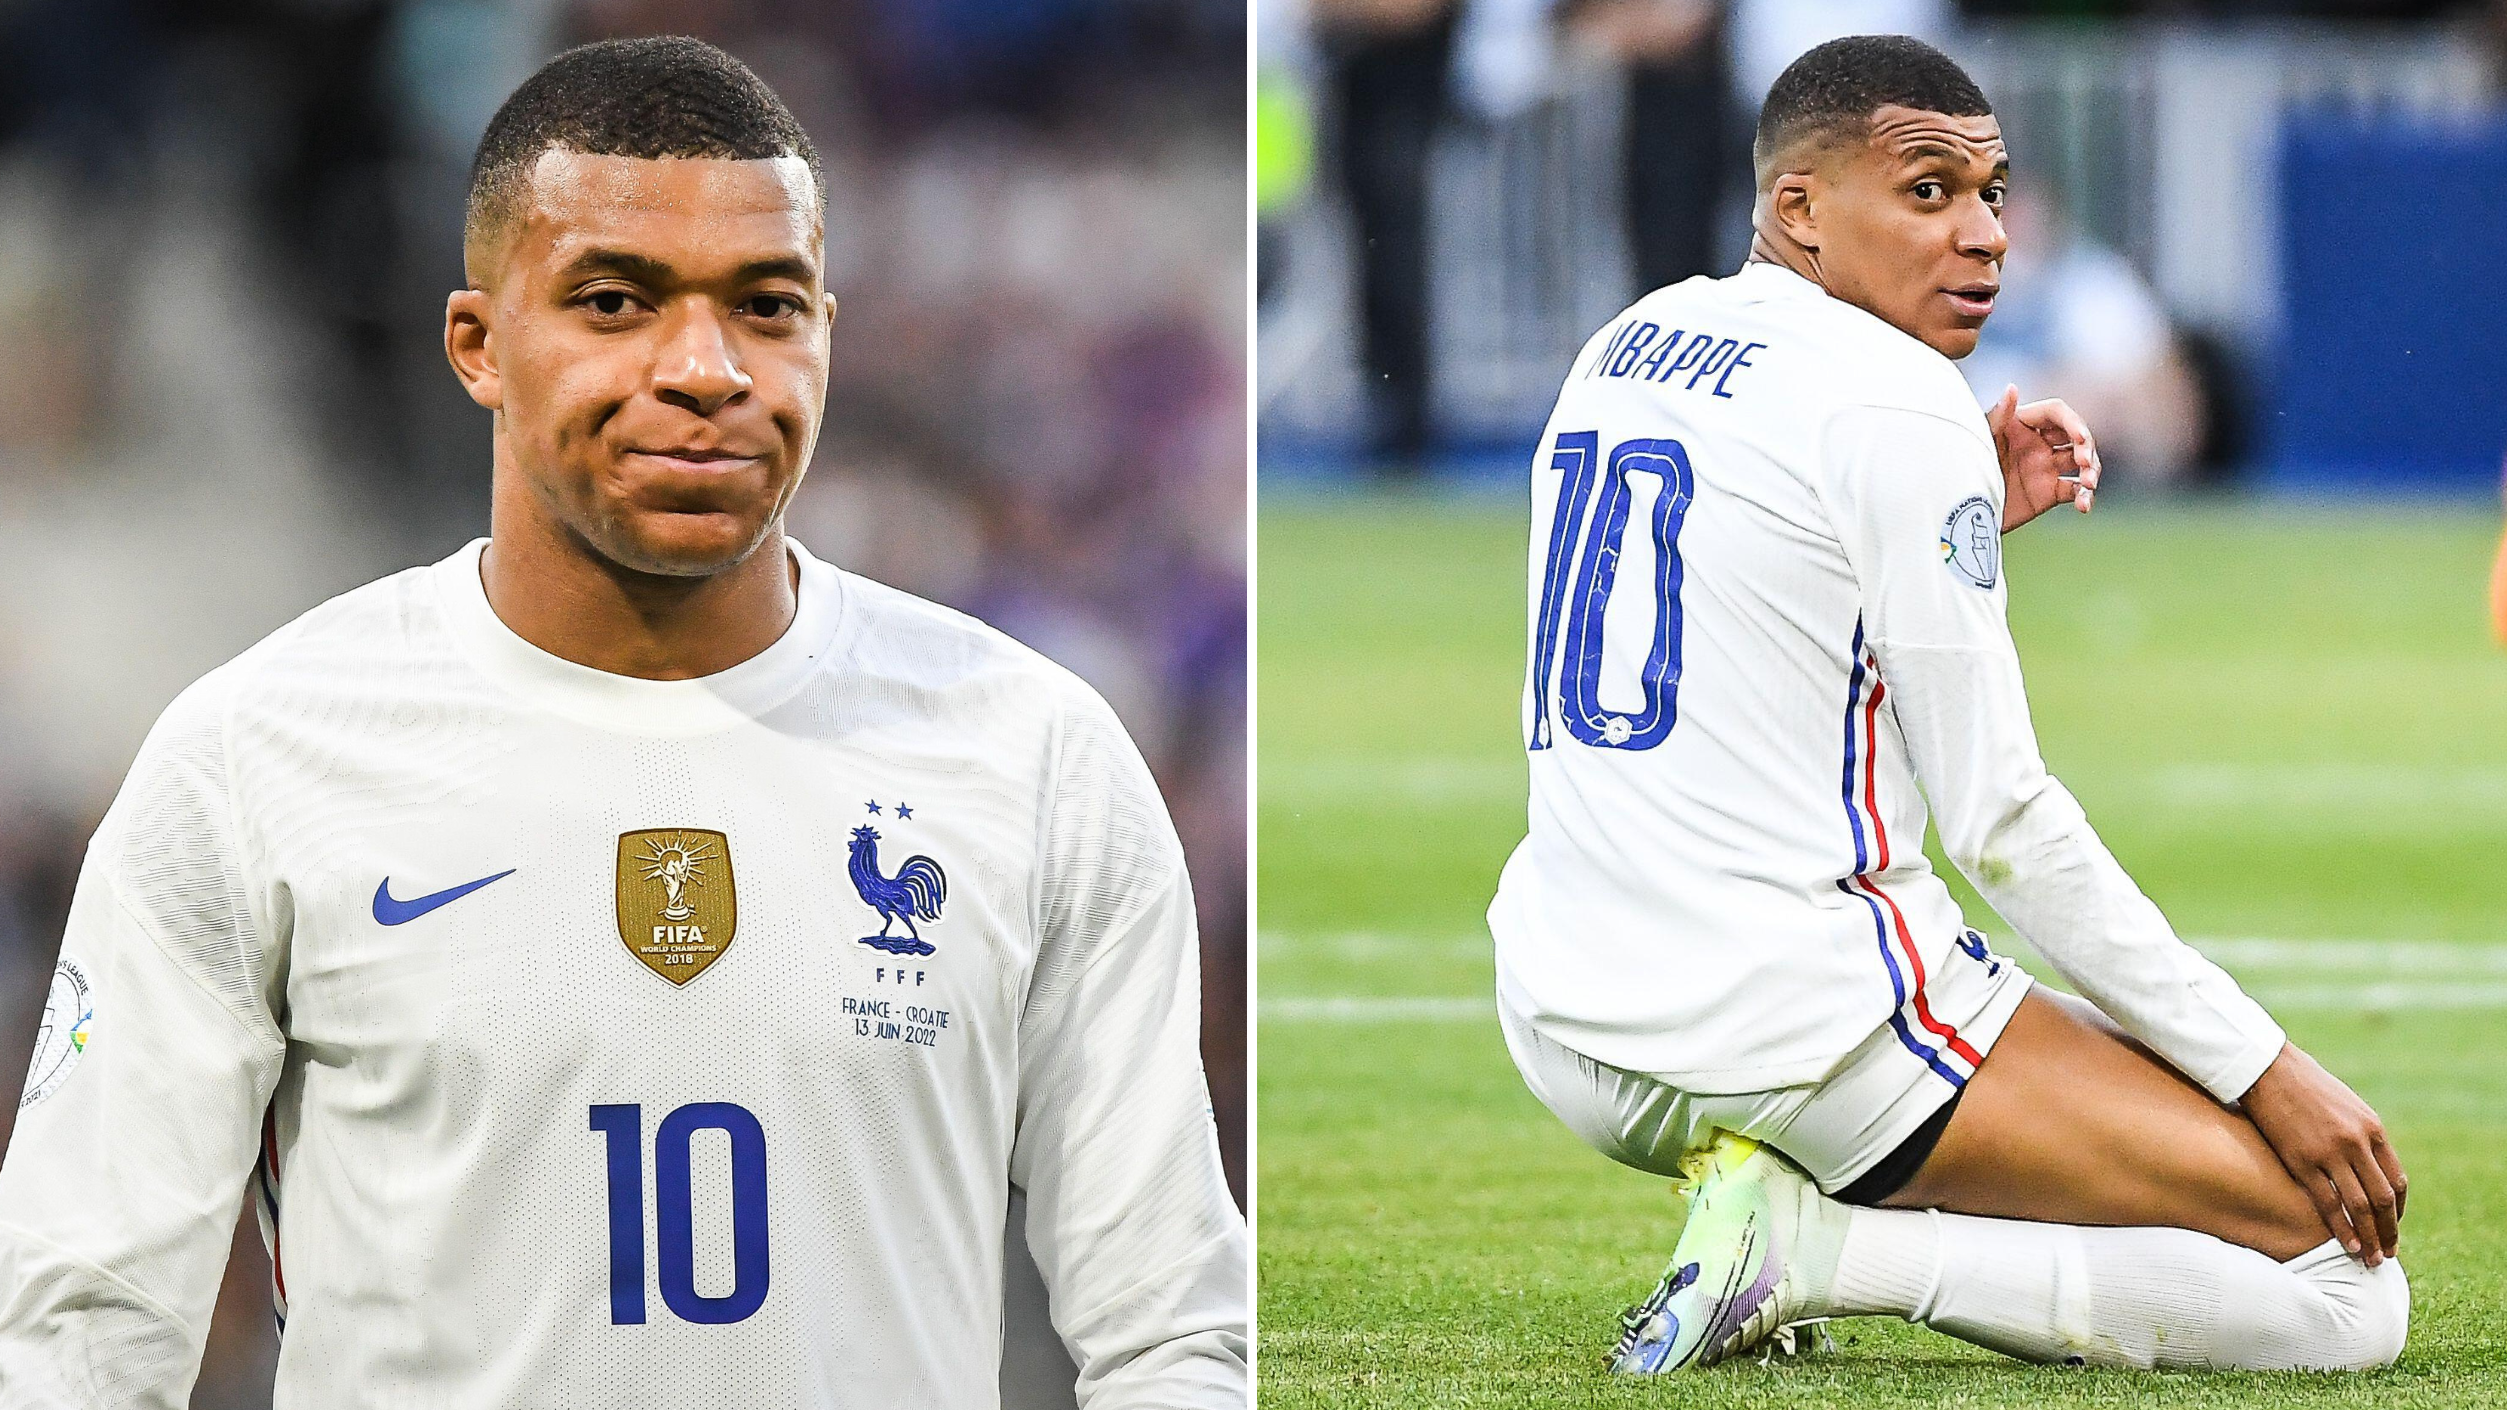 Kylian Mbappe didn't take part in photo shoot with France teammates over  image rights